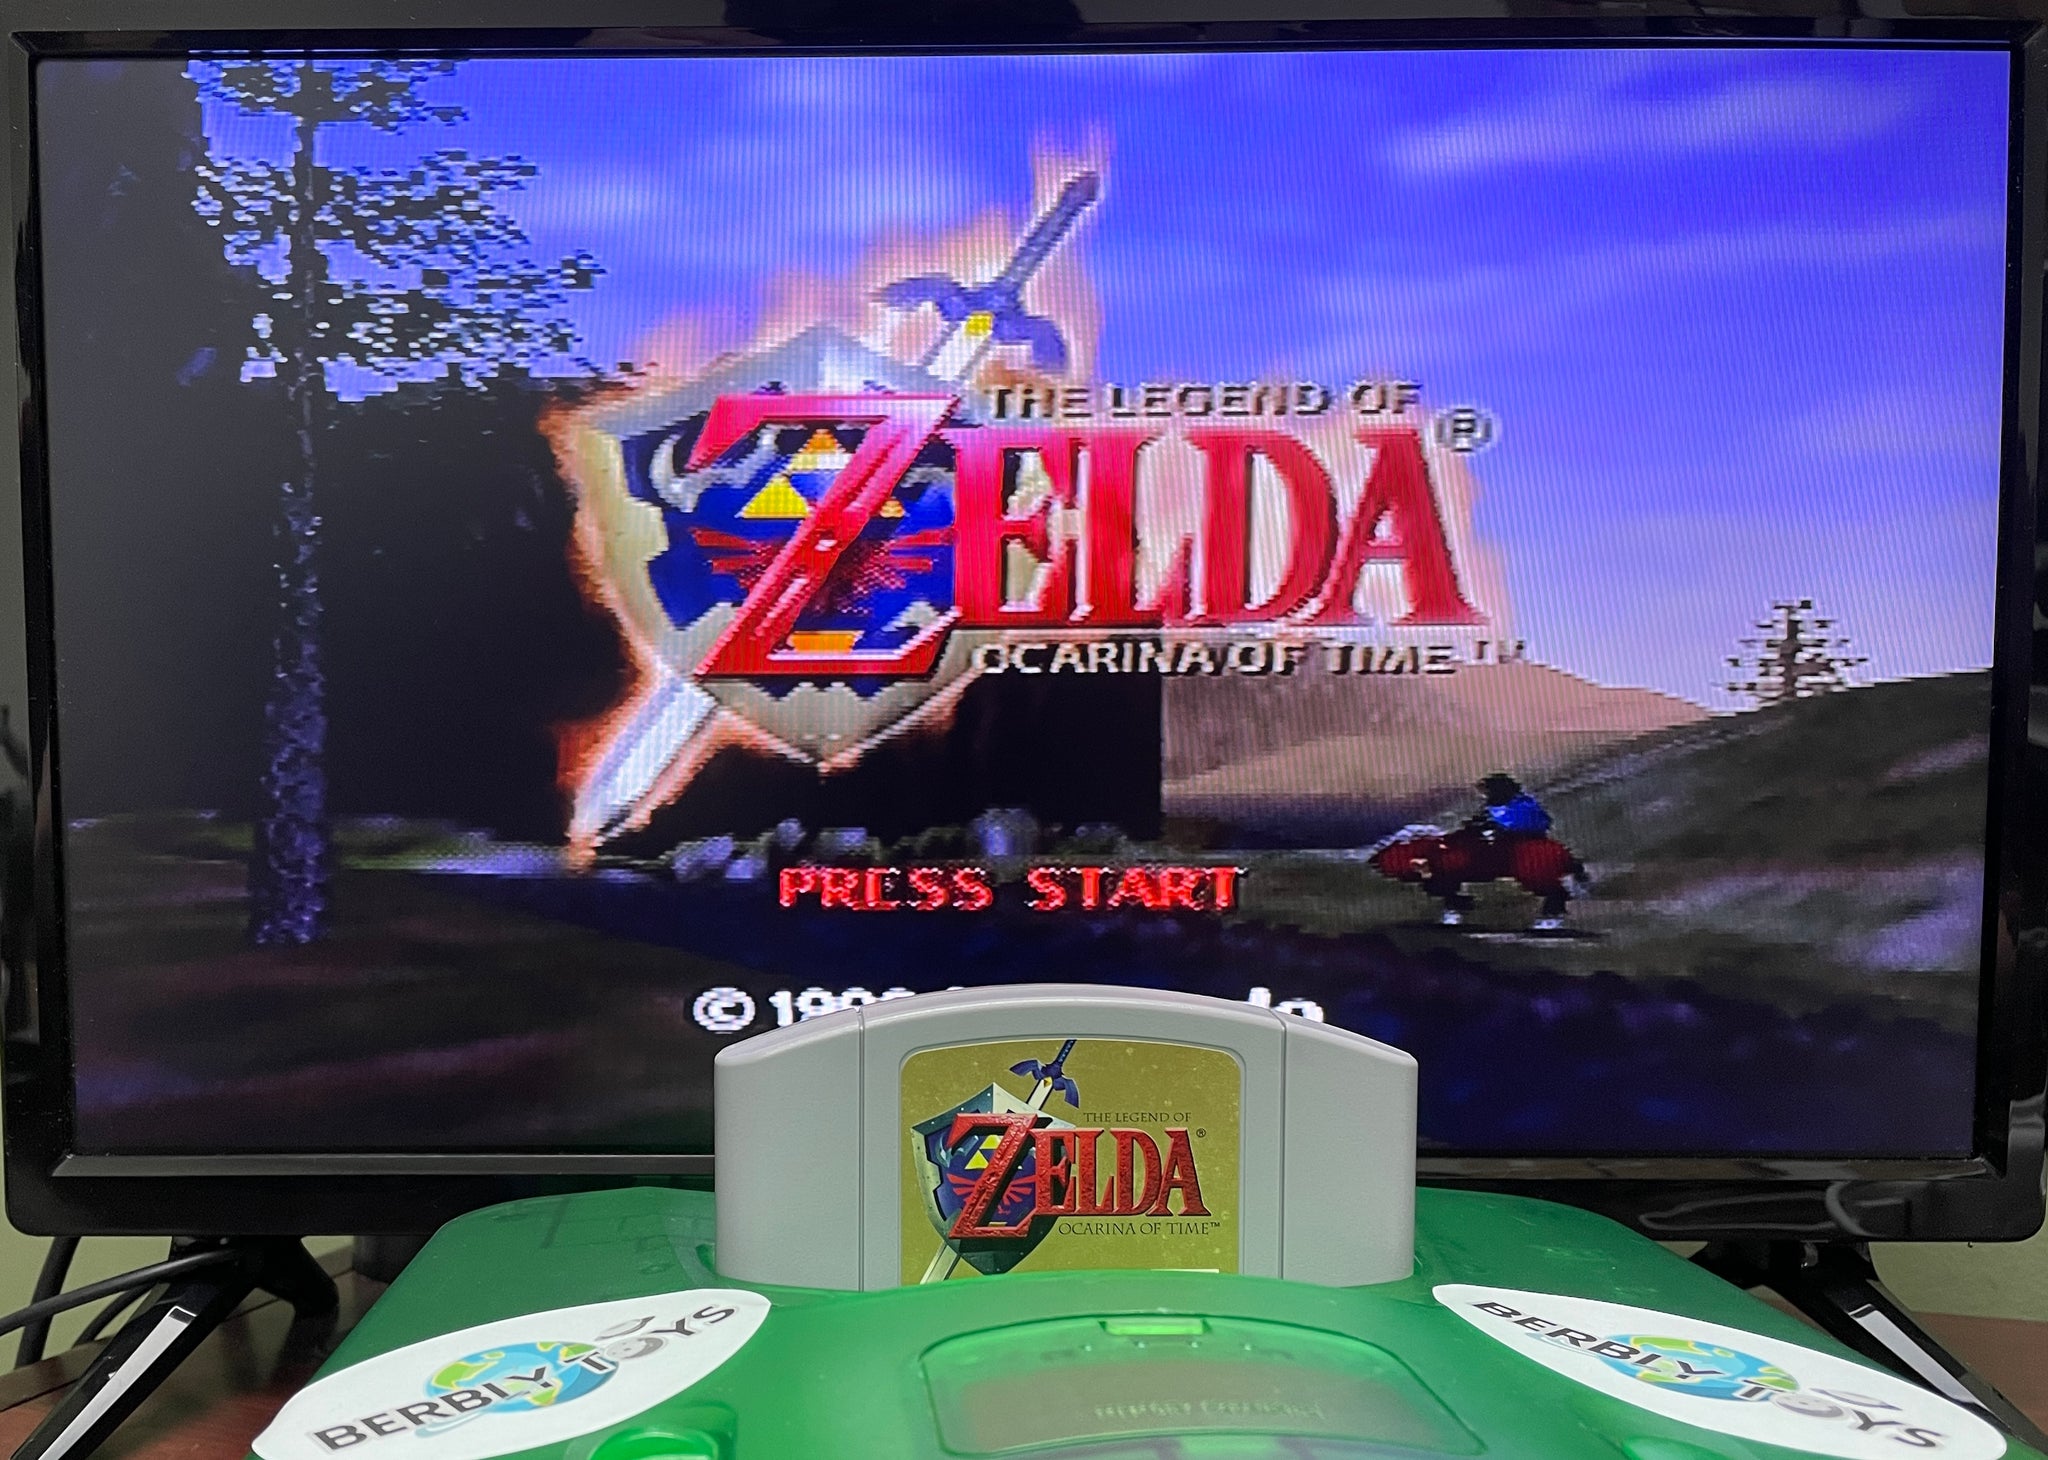 Lot Detail - 1998 N64 Nintendo 64 (USA) The Legend of Zelda: Ocarina of  Time Non Collectors edition Sealed Video Game - WATA 9.6/A++